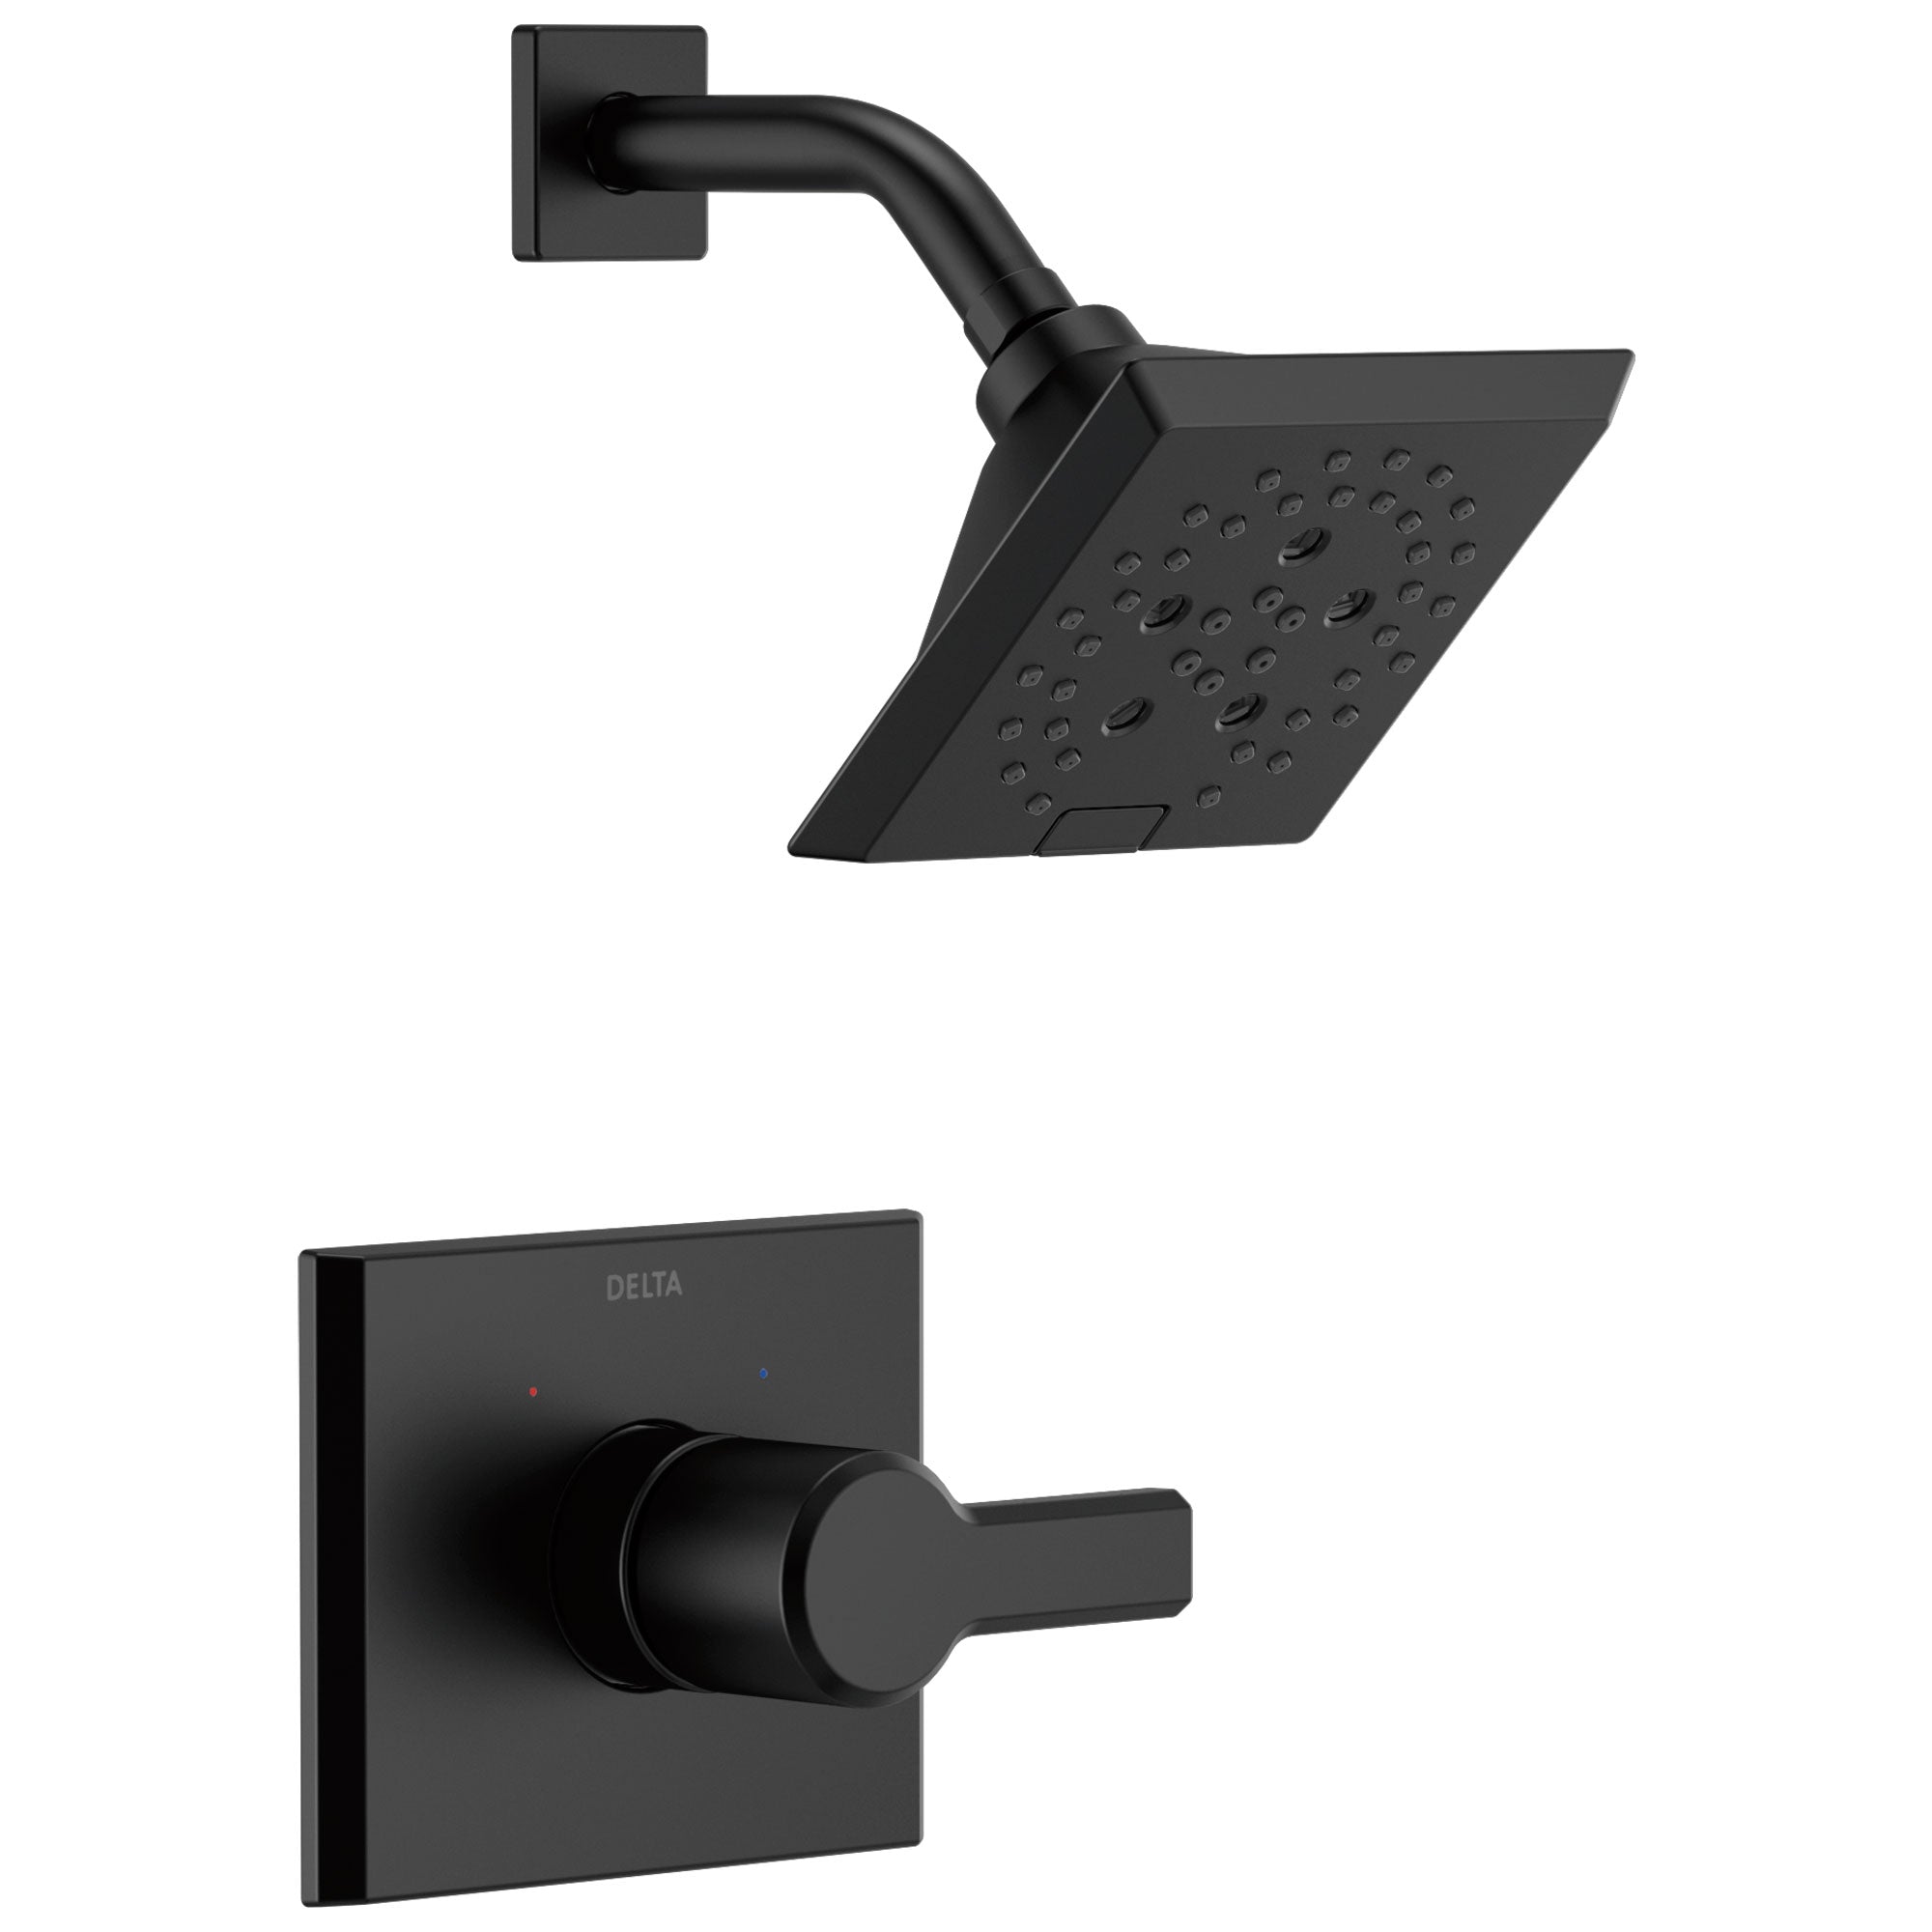 Delta Pivotal Matte Black Finish Monitor 14 Series Shower only Faucet Includes Single Lever Handle, Cartridge, and Valve with Stops D3480V